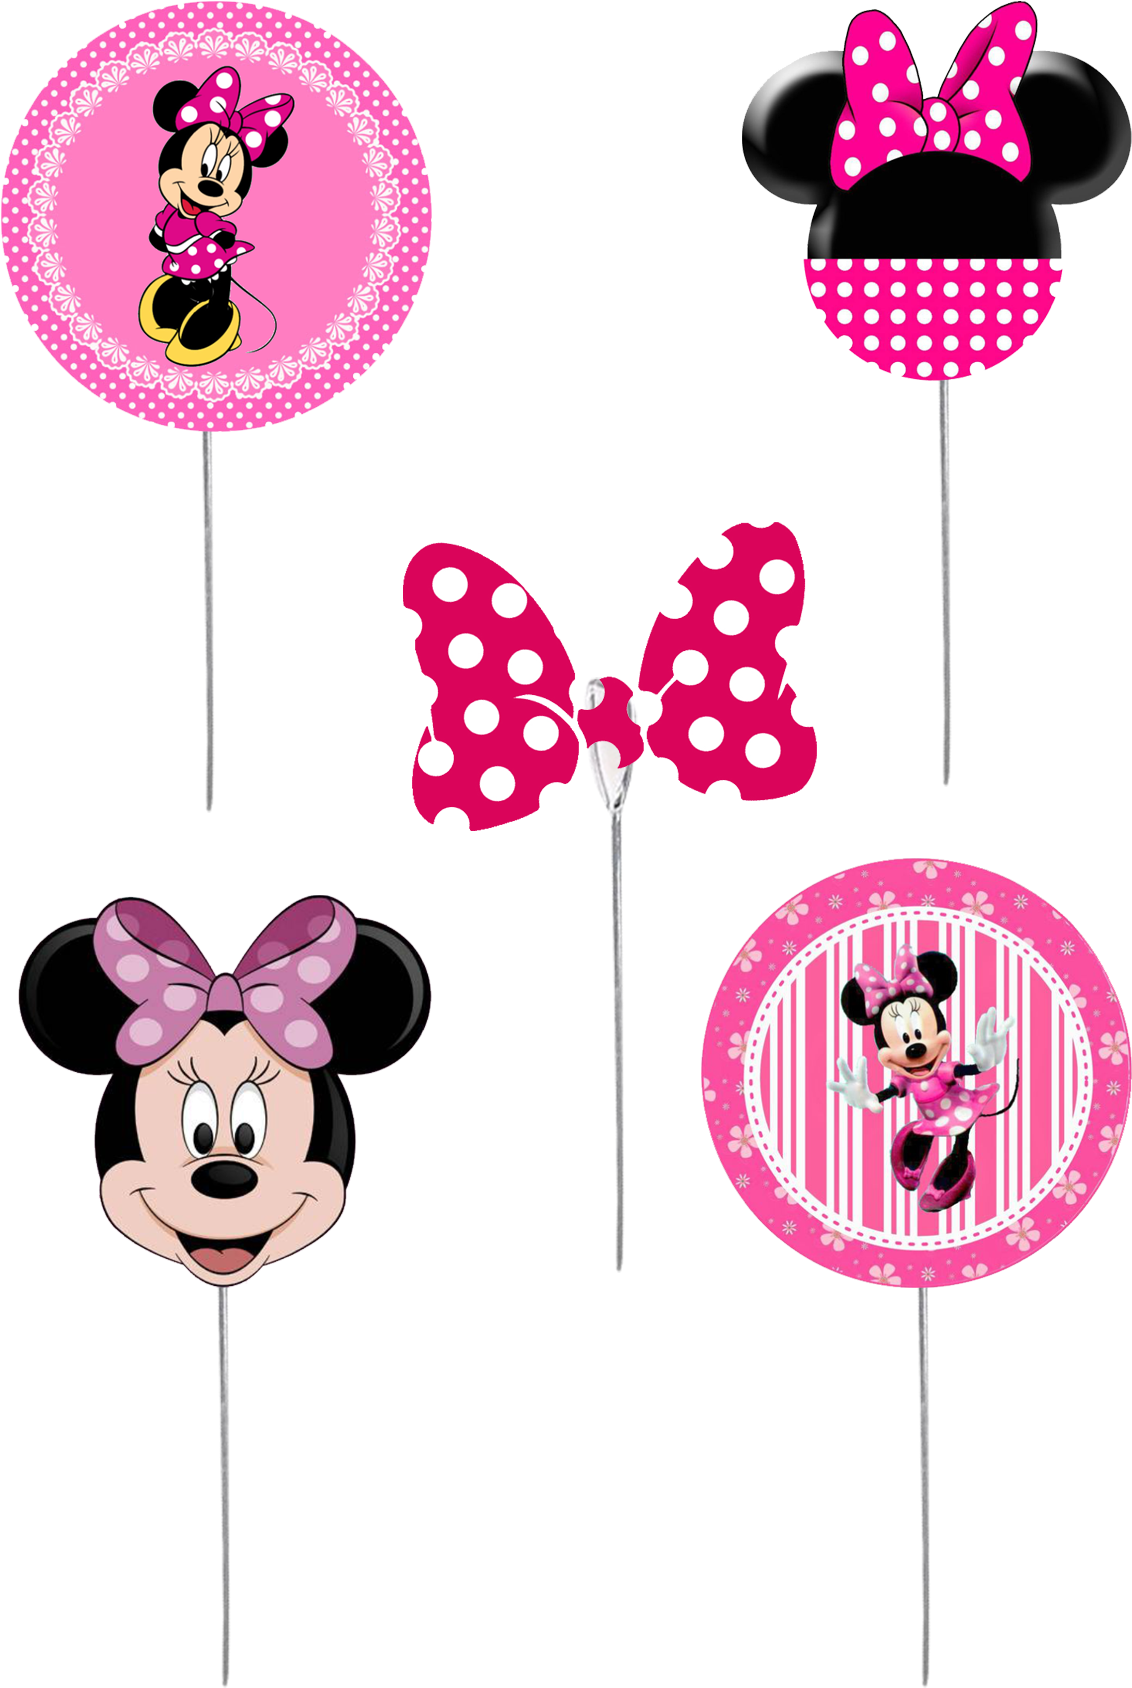 A Group Of Pink And White Polka Dot Lollipops